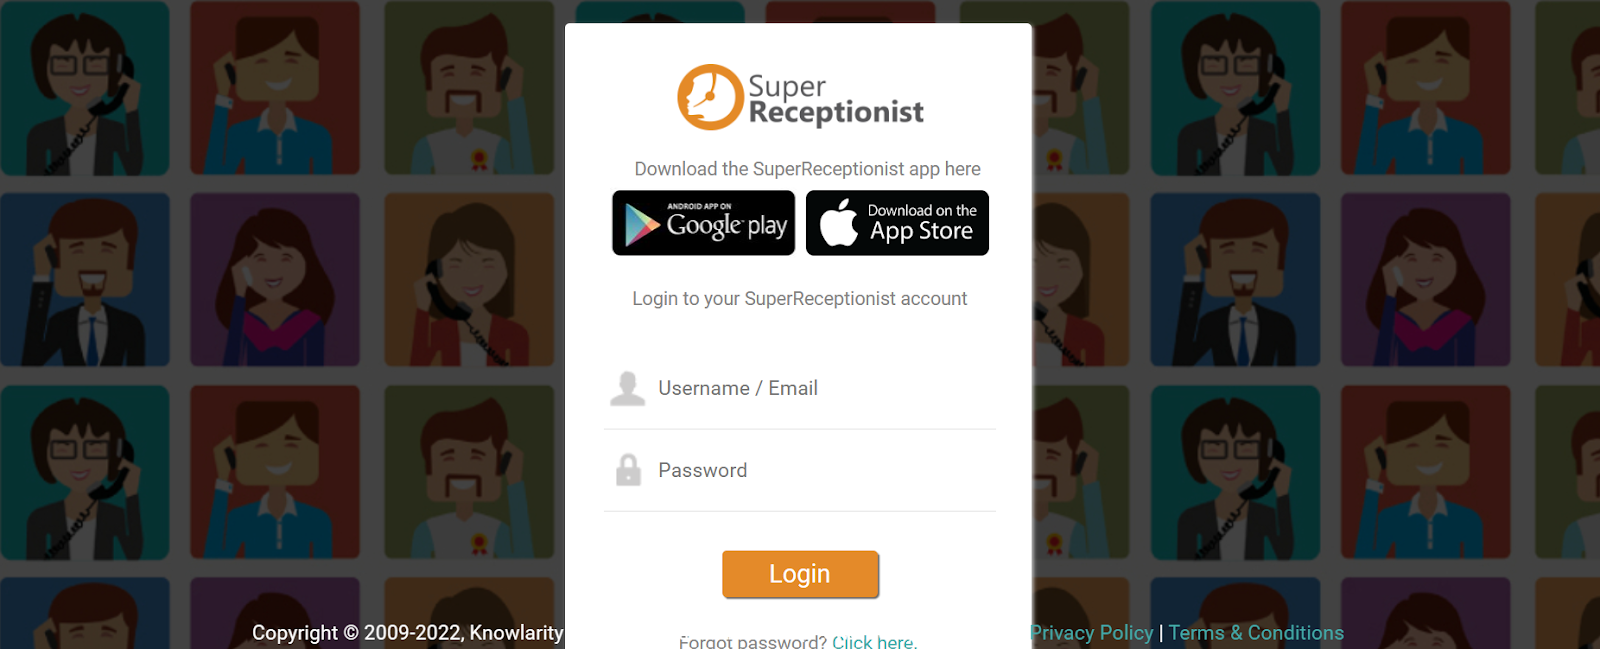 SuperReceptionist website snapshot highlighting the services it provides.